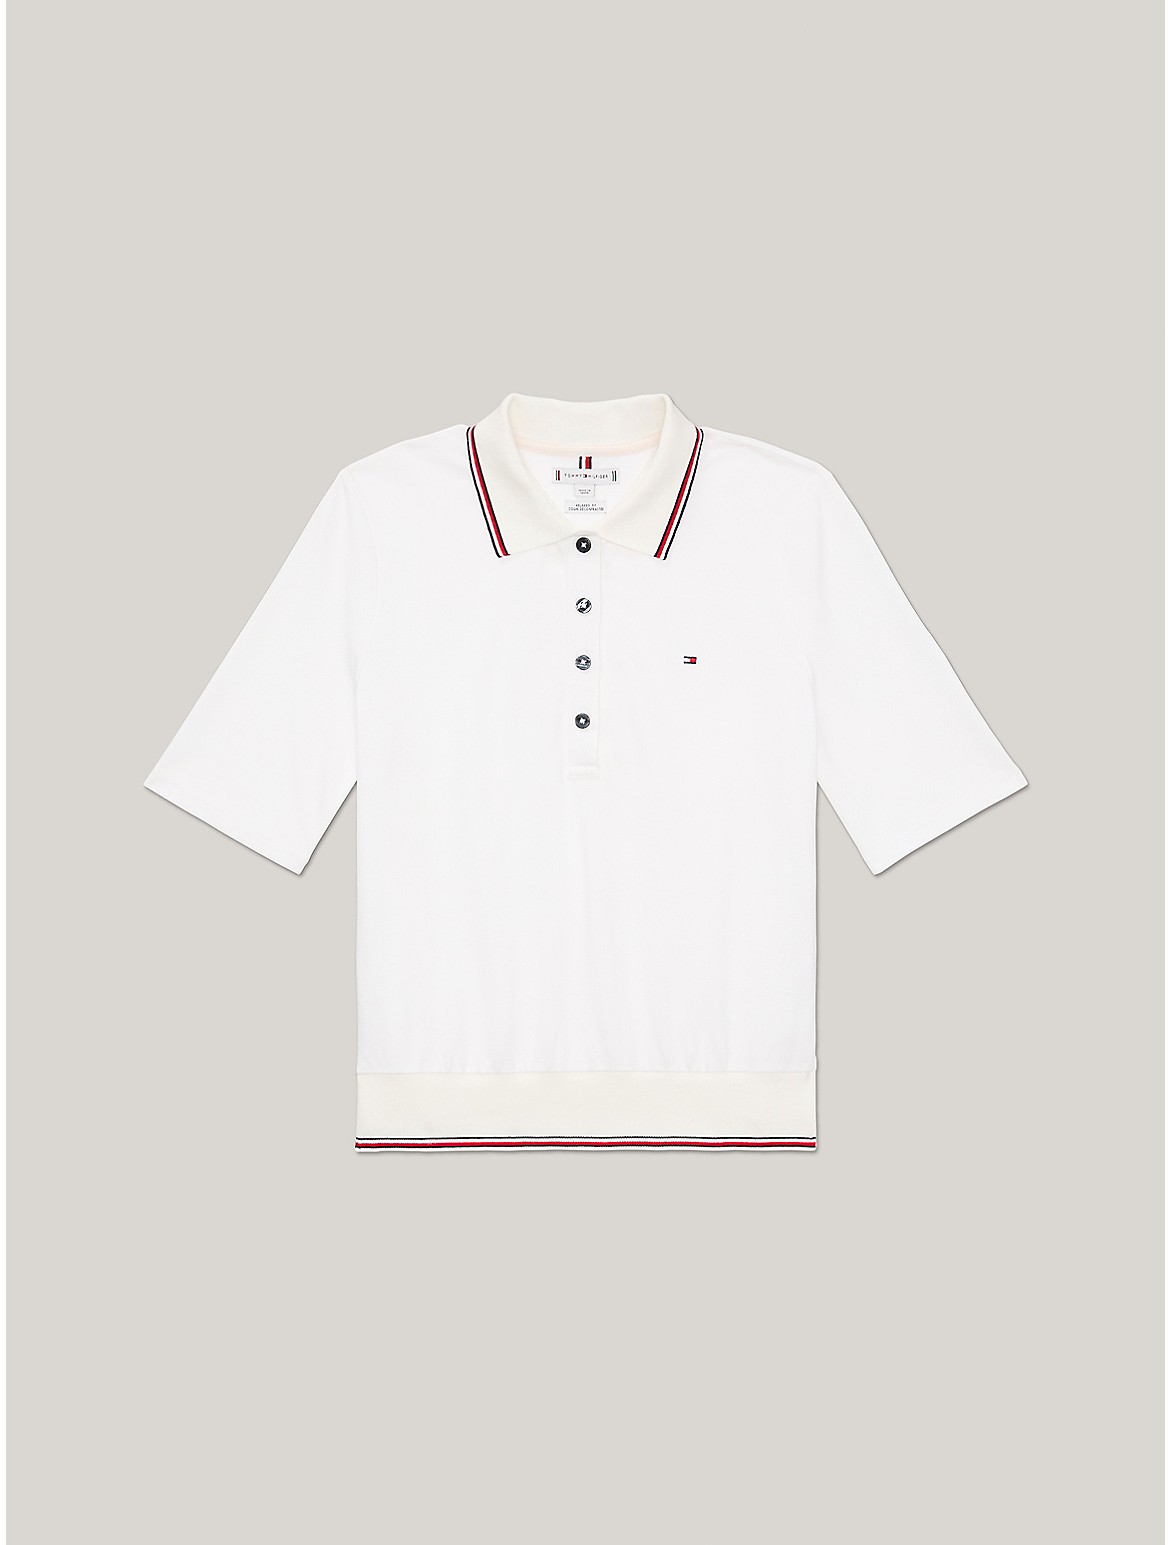 Tommy Hilfiger Women's Regular Fit Tipped Polo